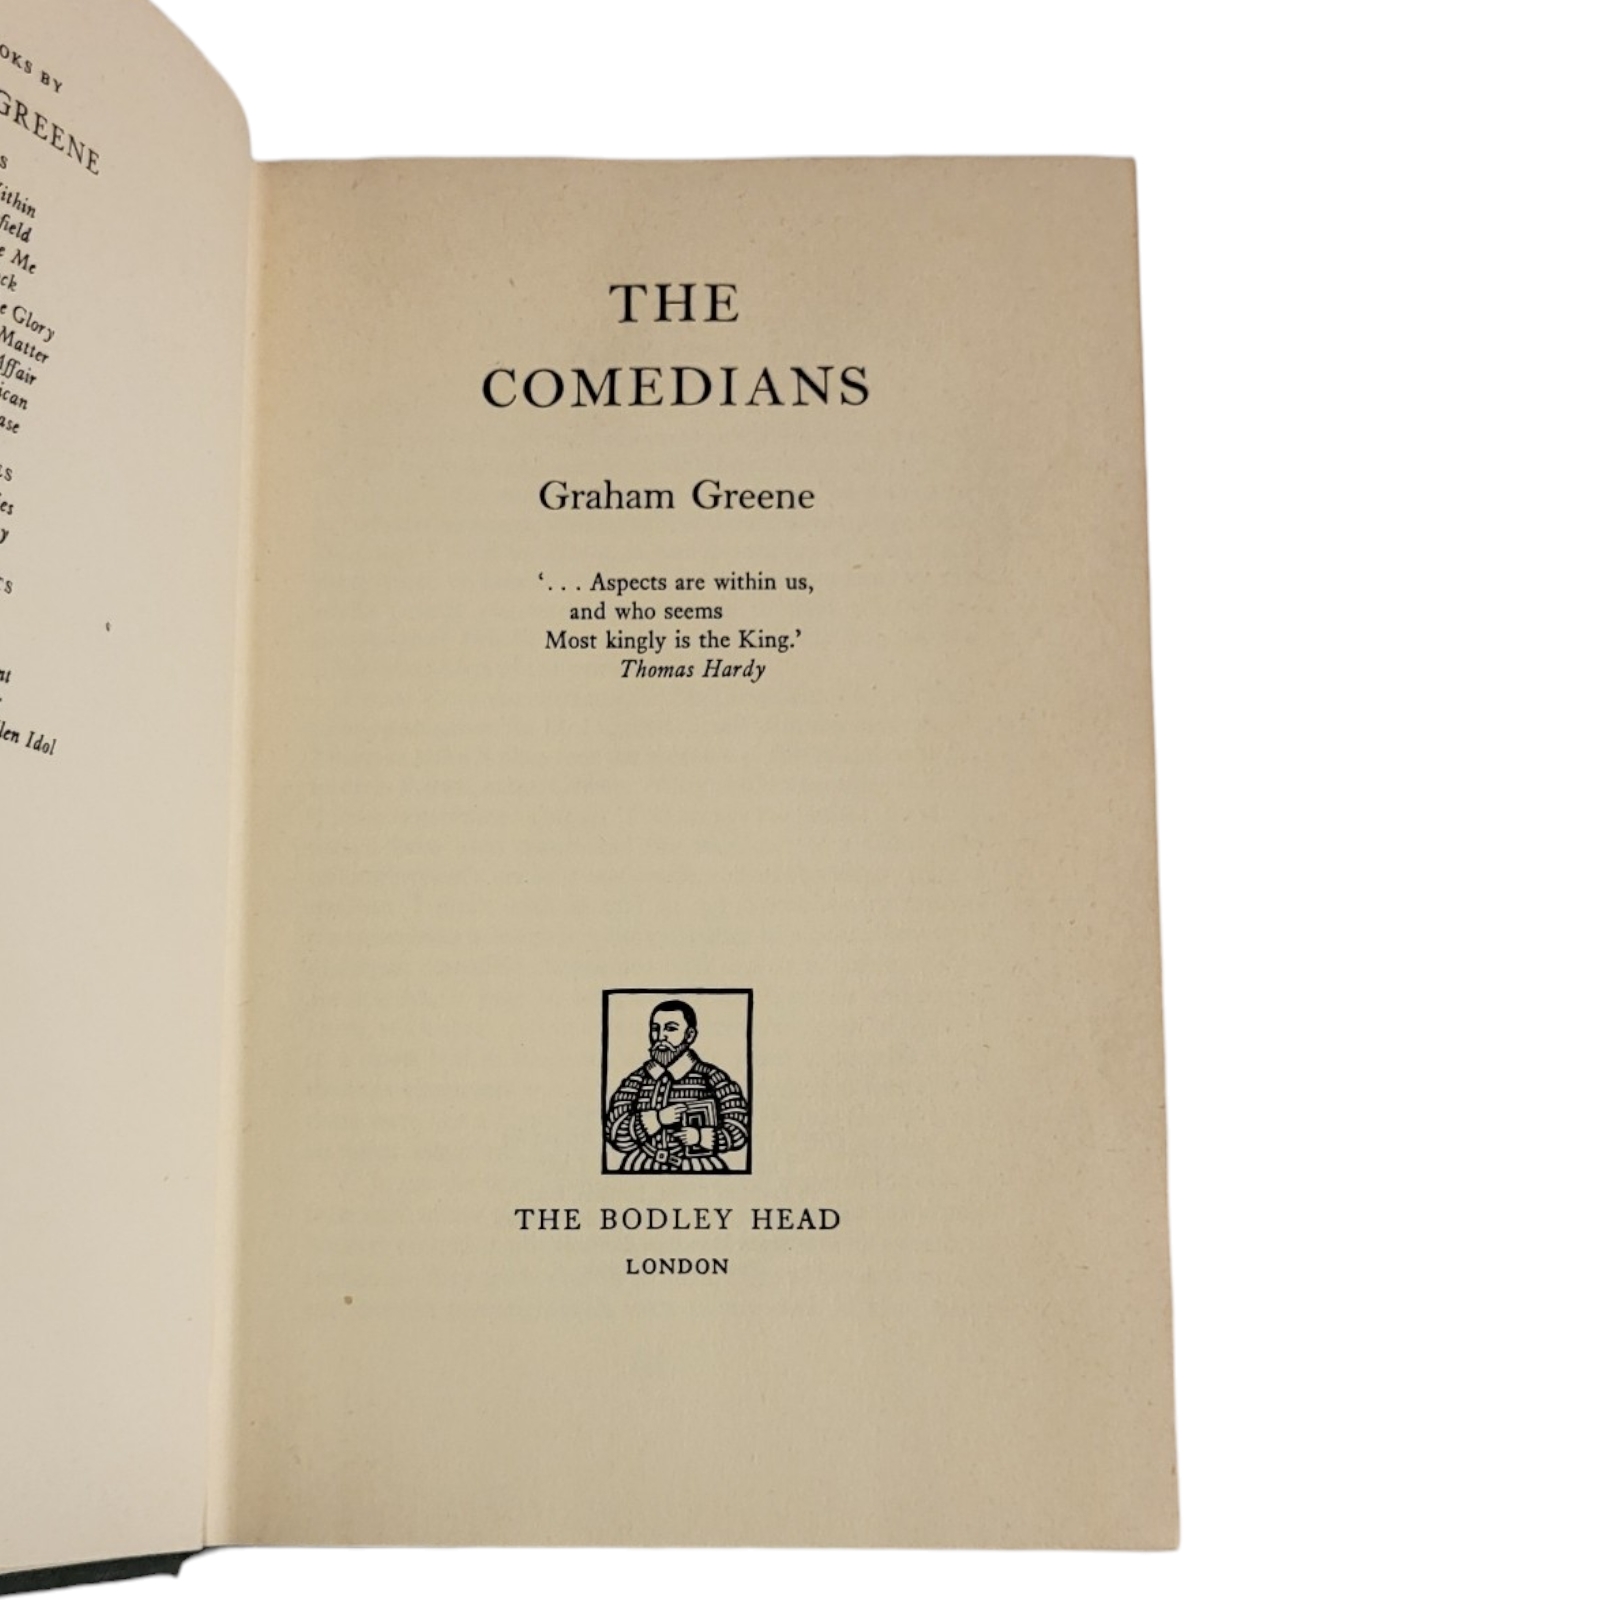 GRAHAM GREENE, THE COMEDIANS, DUST JACKET BY IVAN LAPPER First published for The Bodley Head Ltd, by - Image 4 of 9